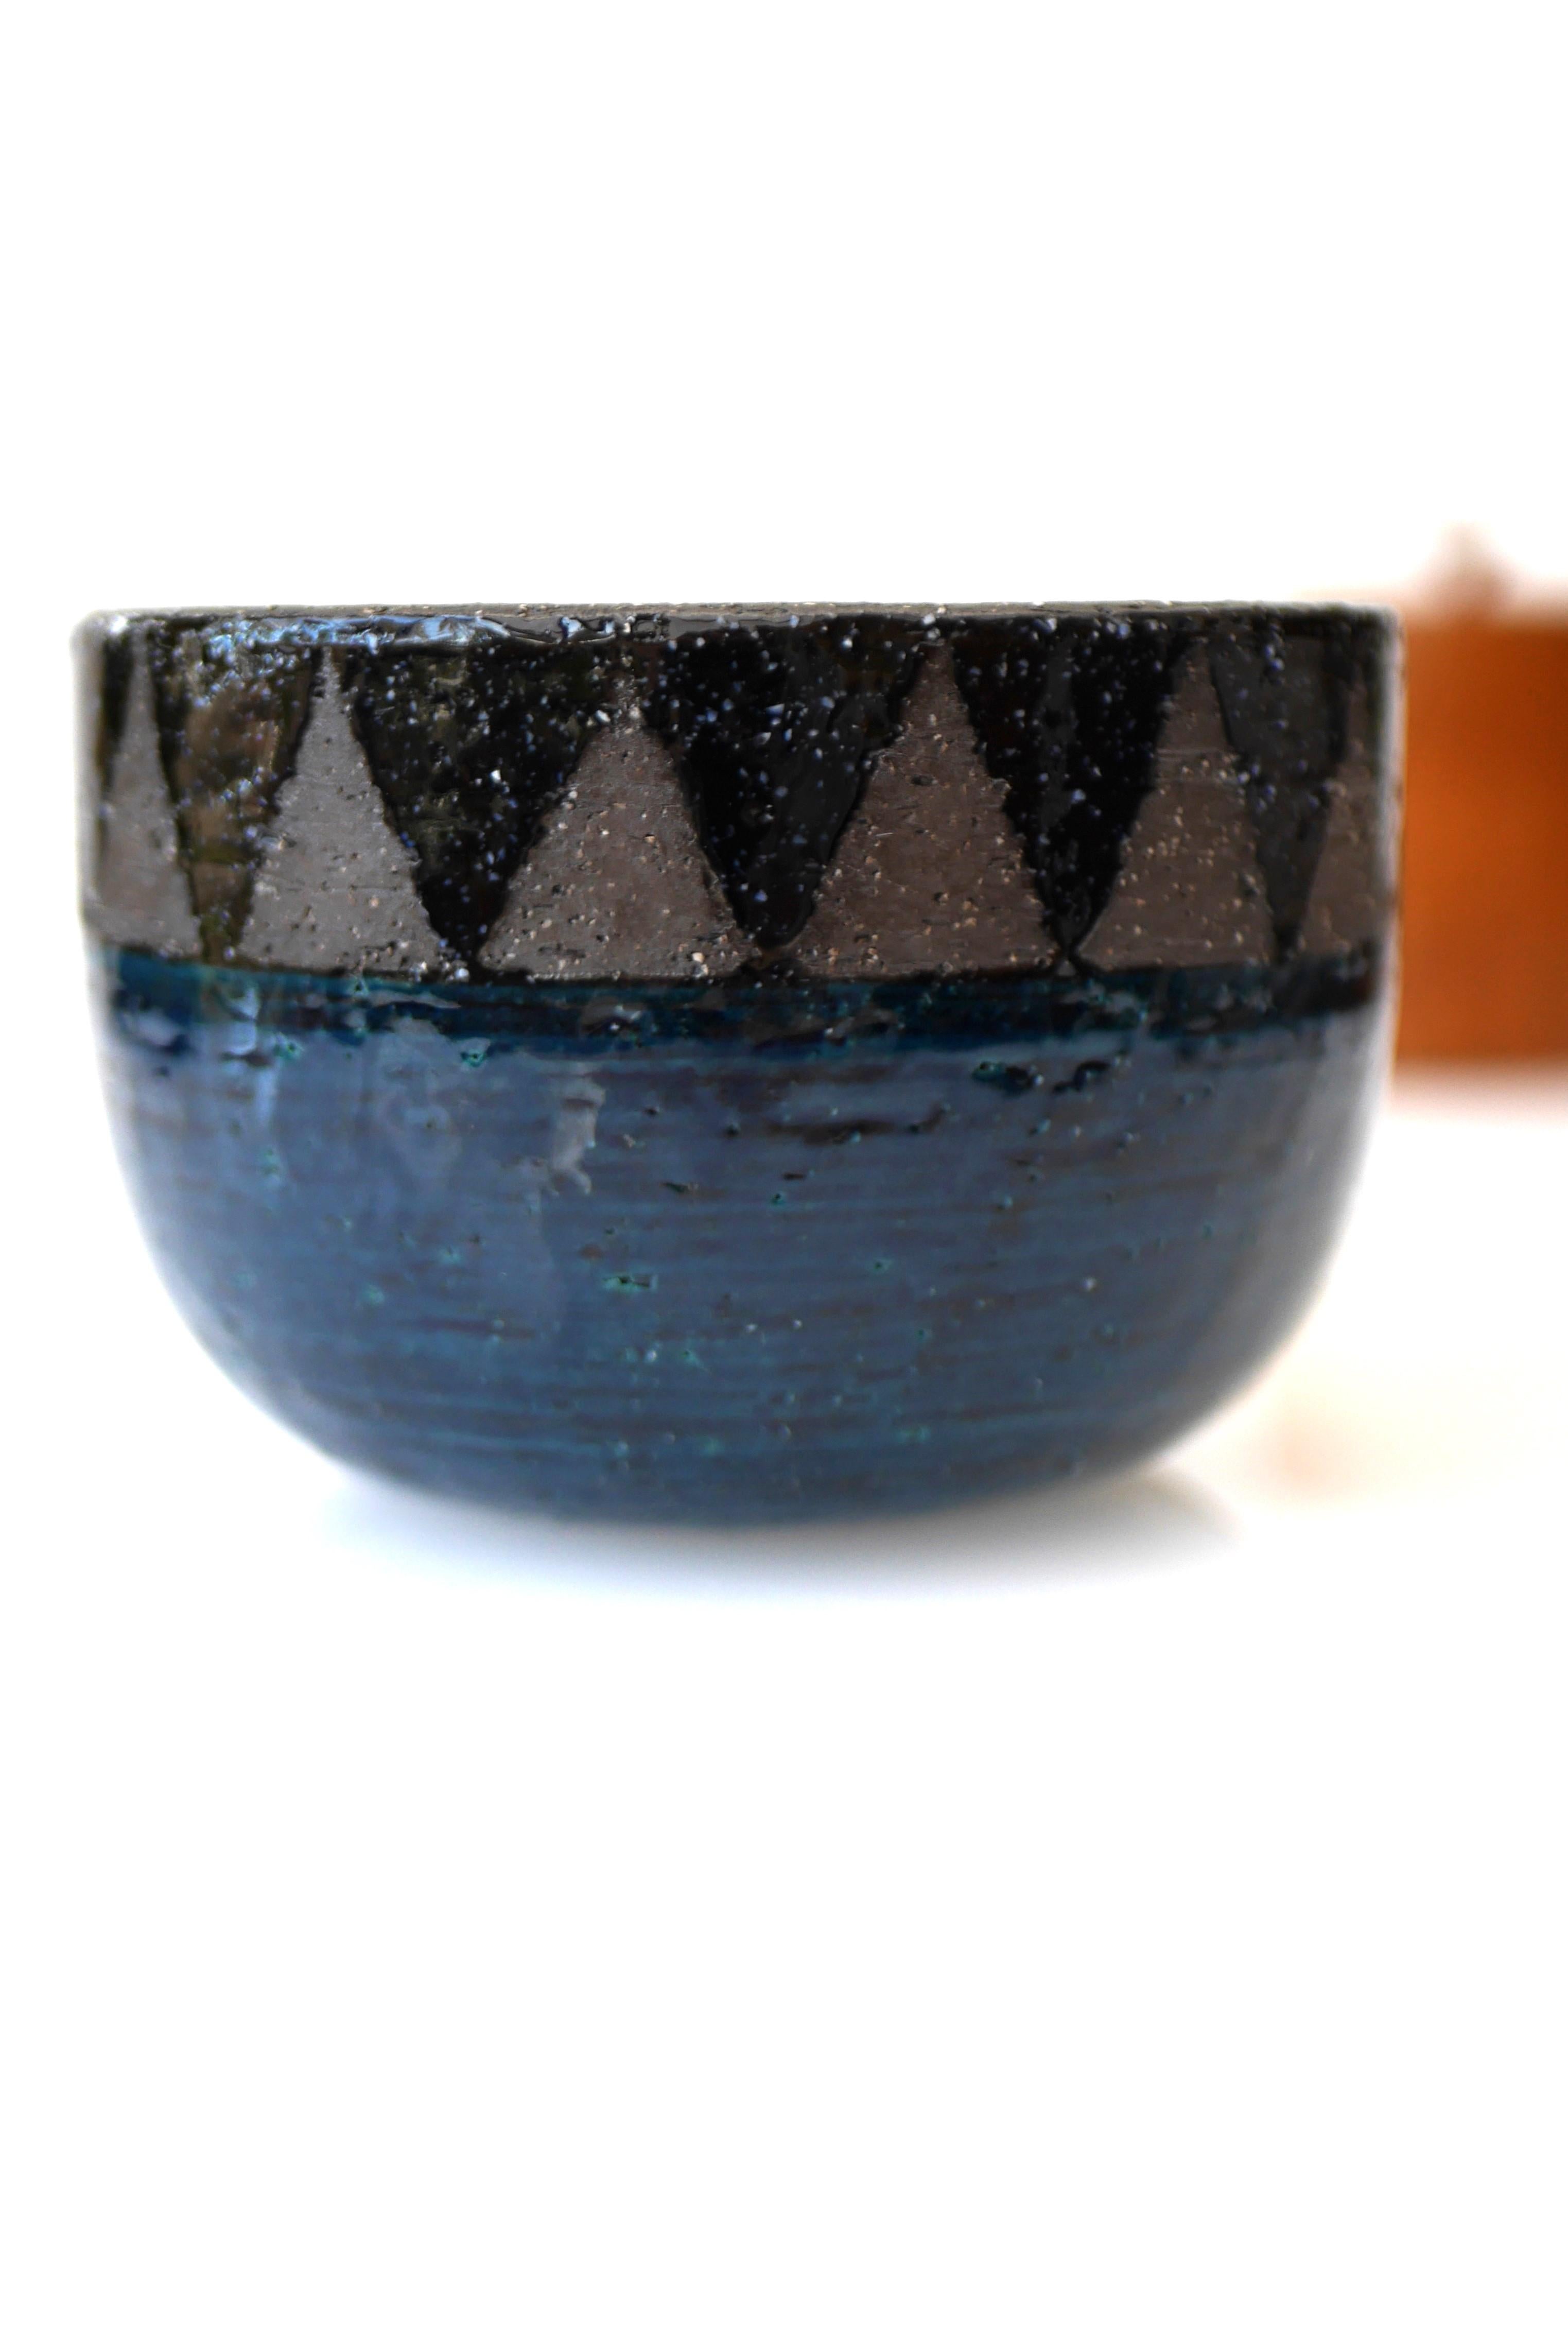 A signed studio production art ceramic bowl by Inger Persson for Rörstrand, Sweden. As most of her work this is a small studio product, a small bowl or flowerpot which is very rare and has an unusual pattern in the glazing. As always, her work is